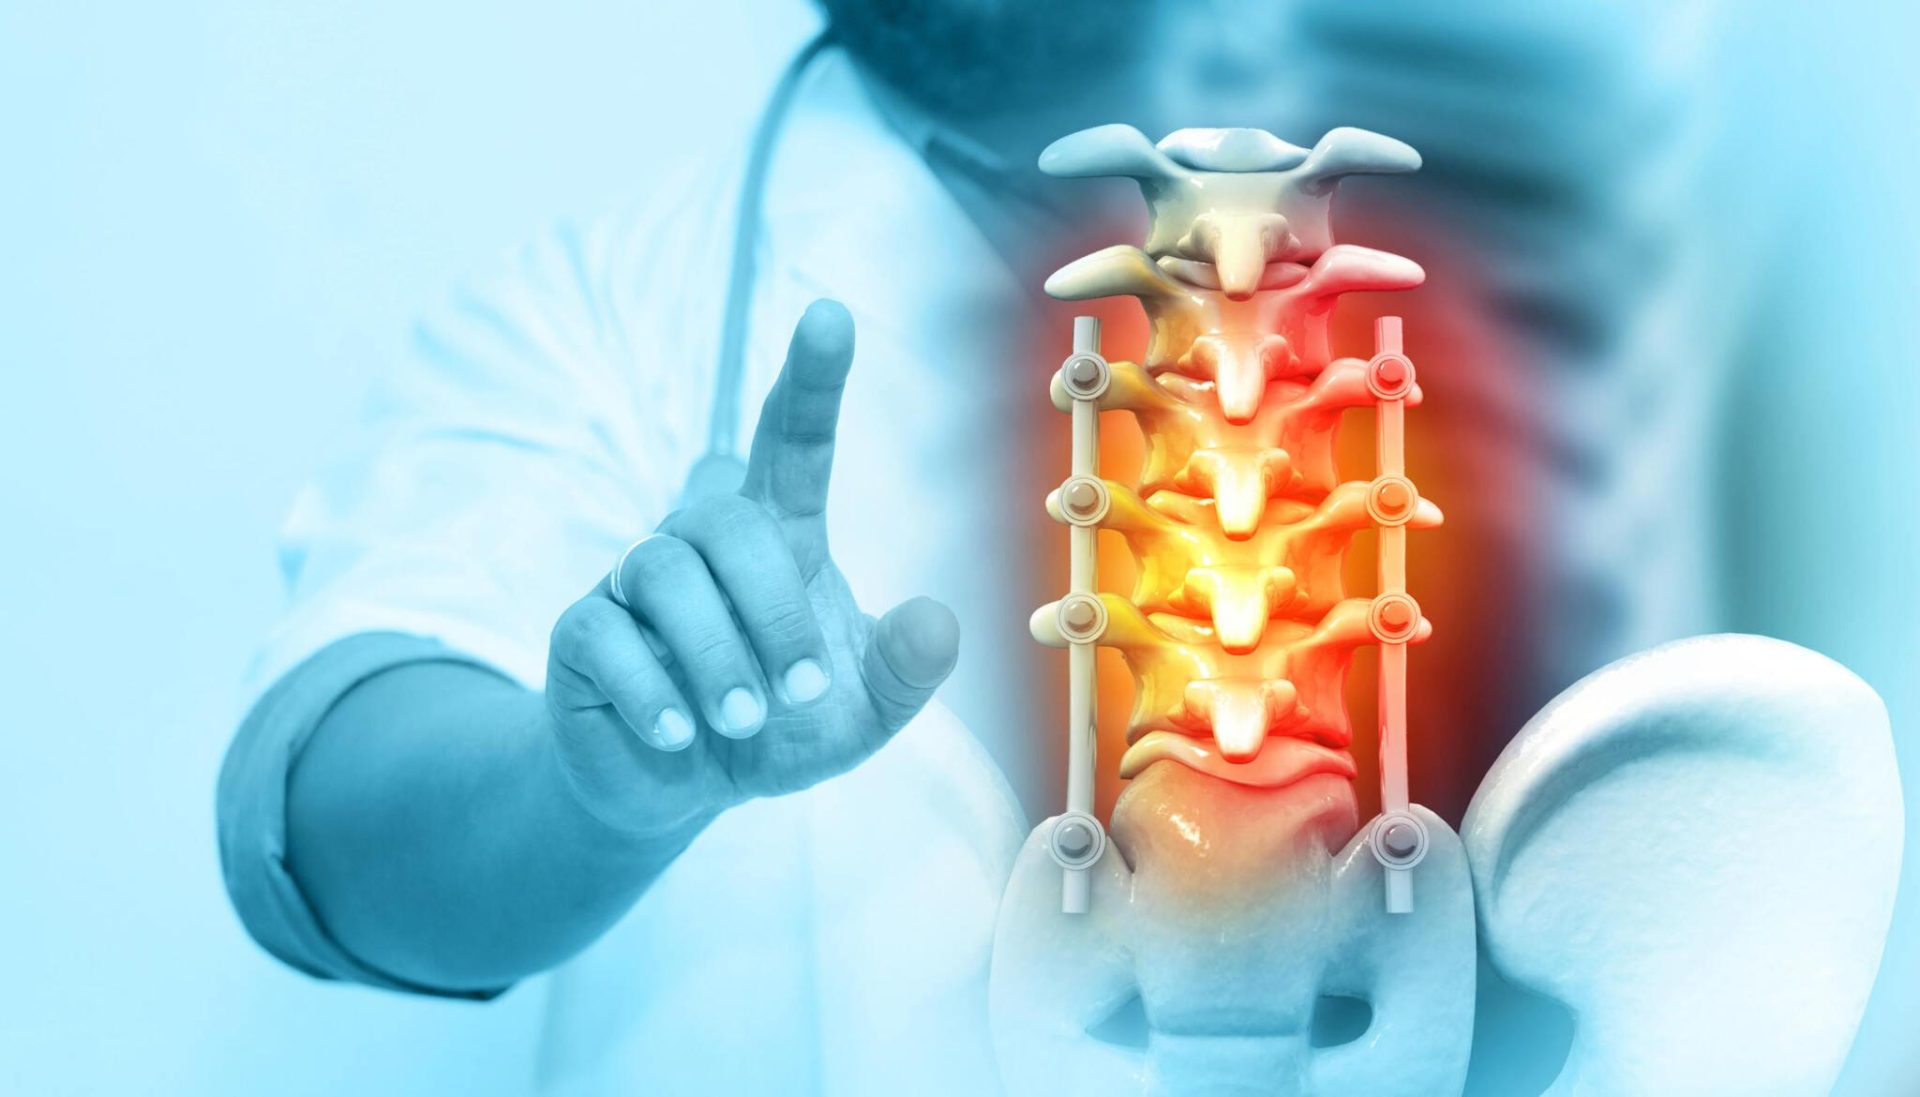 Stem Cell Therapy: A Non-surgical Alternative To Spinal Stenosis